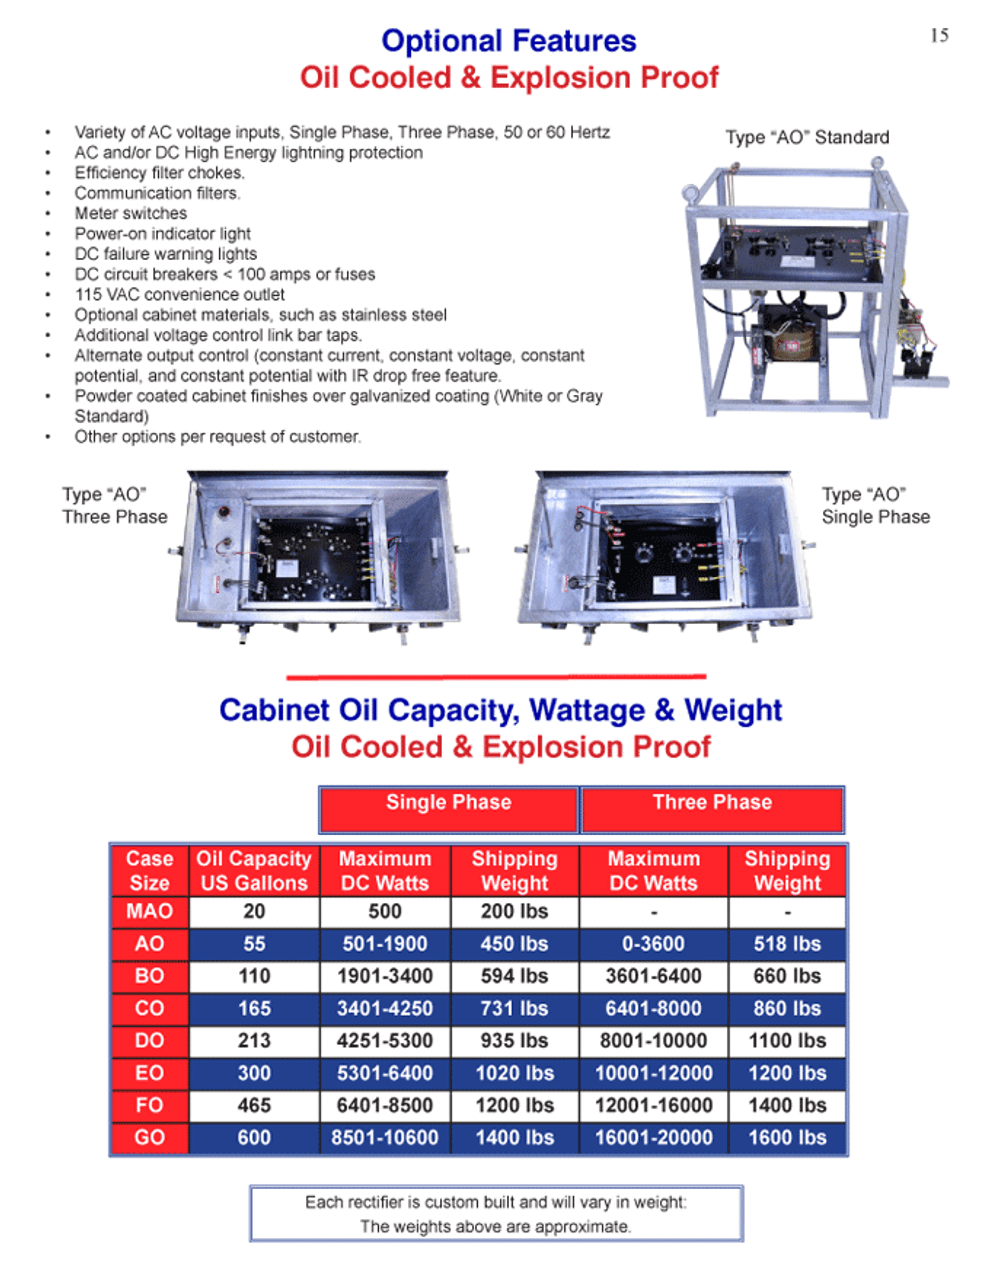 Oil Cooled & Explosion Proof